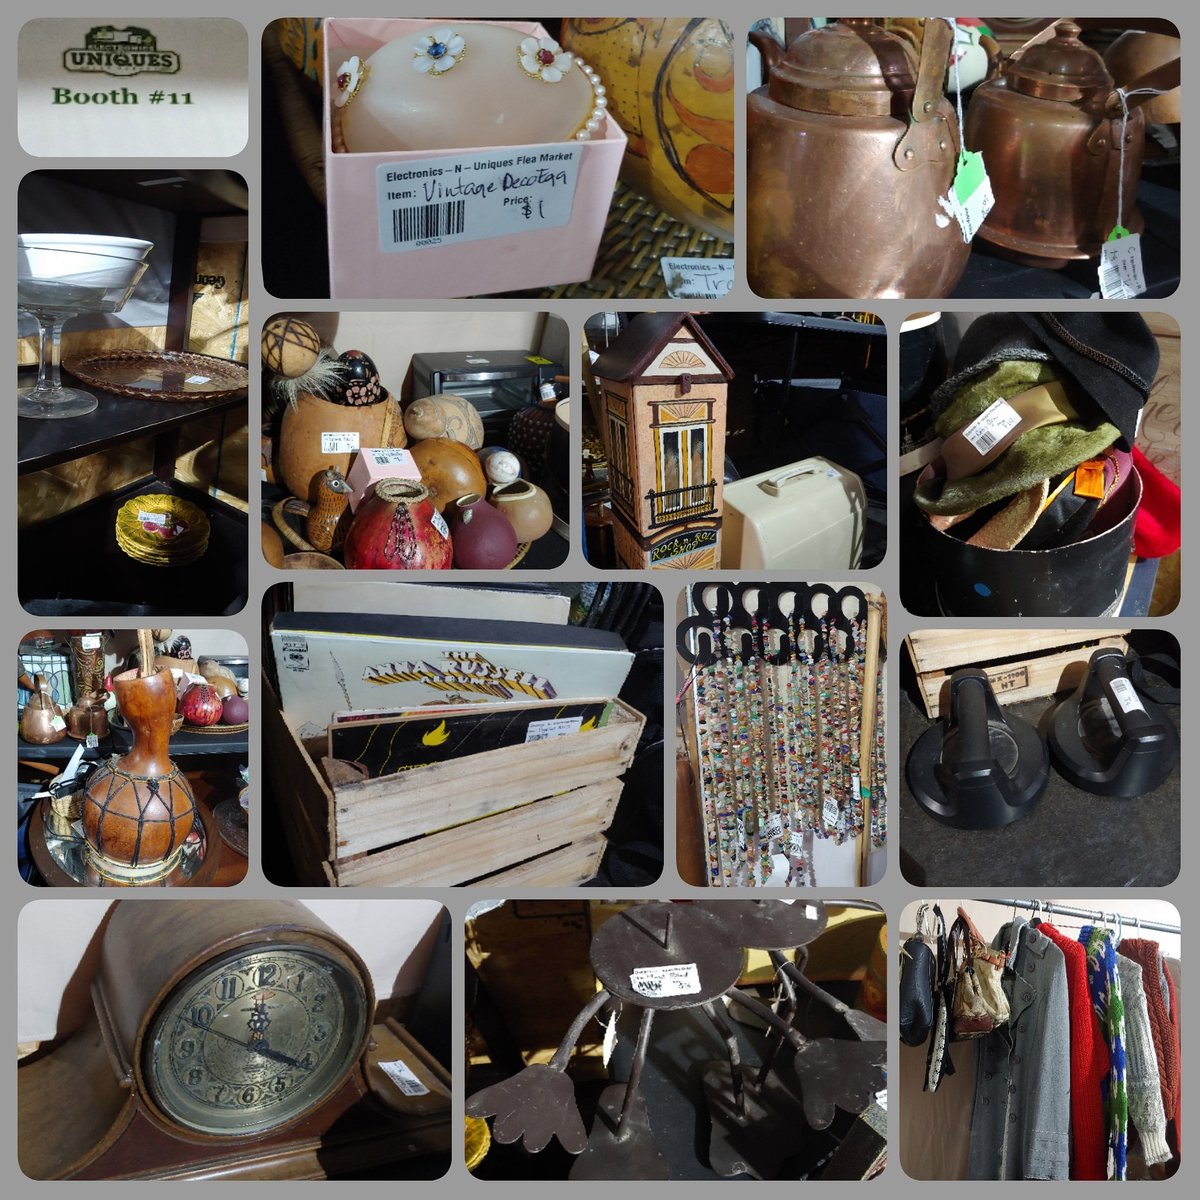 Stacey Loalbo once said, 'Nothing beats the value of Vintage!' Take a look at Booth #11's Vintage Collection!! We've got tribal treasures, clothes, dishes, jewelry, and much more!! #vintagecollection #tribaltreasures #clothes #dishes #jewelry